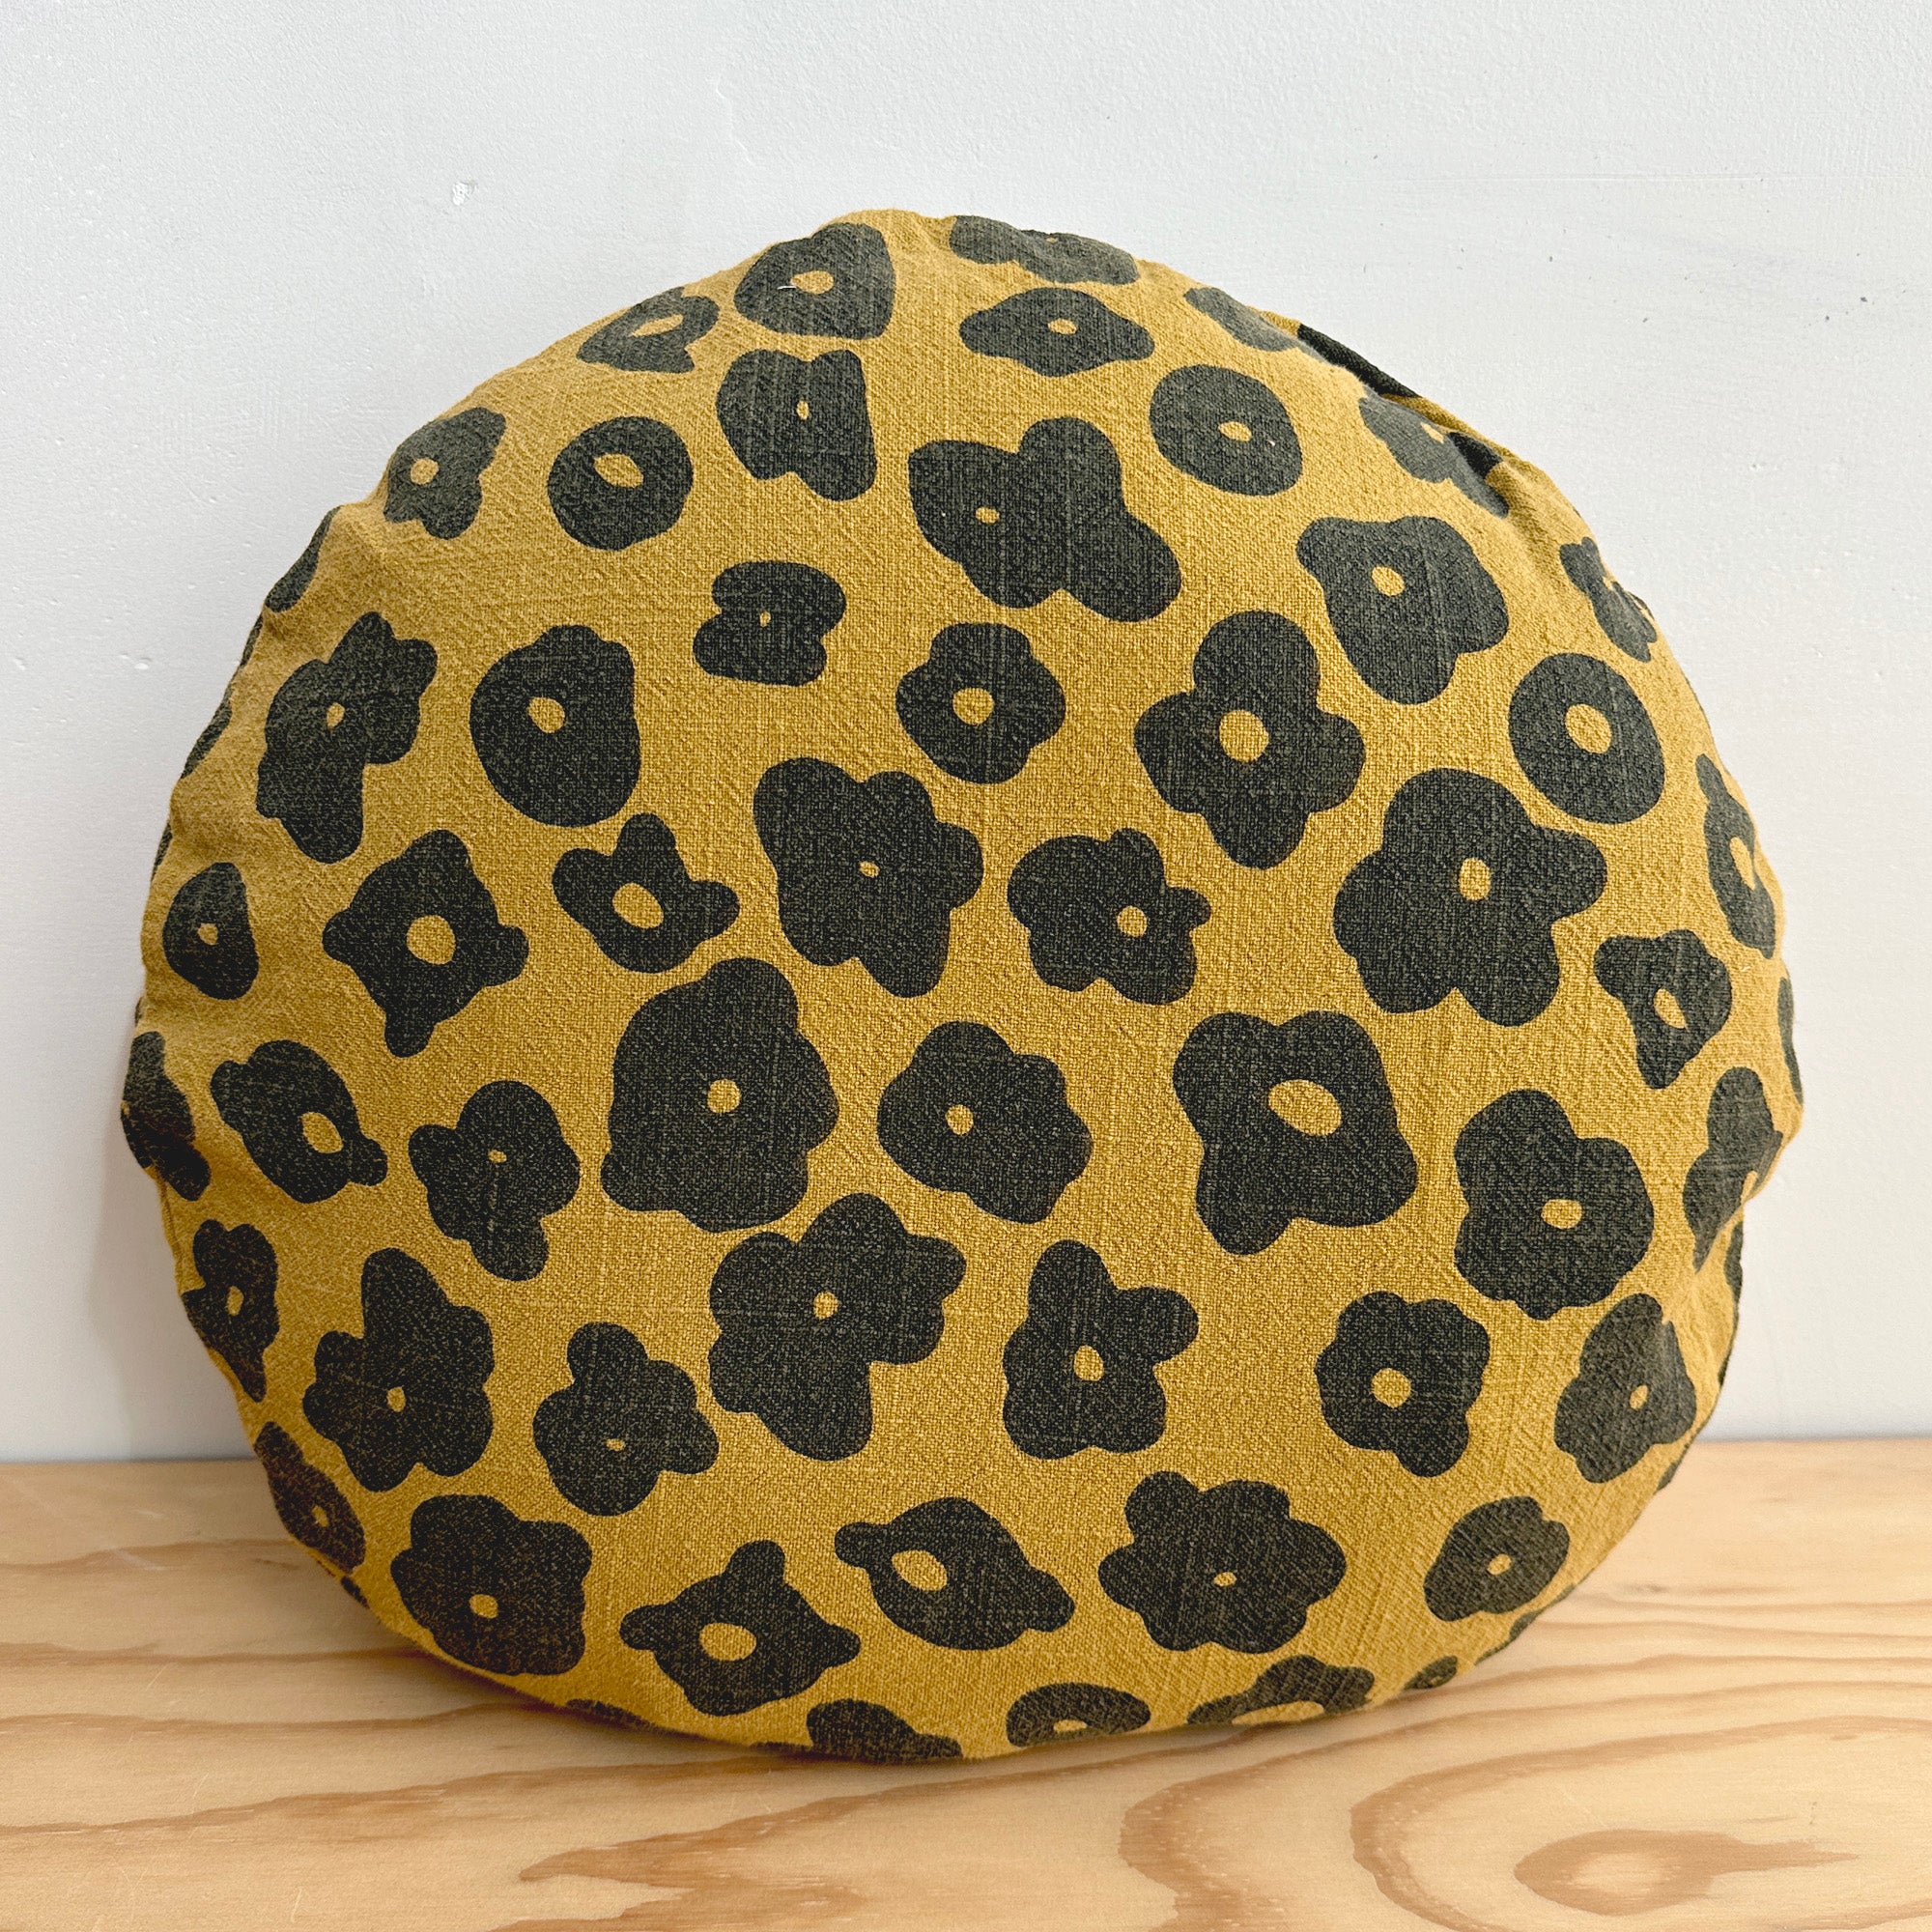 The Round Throw Pillow - Celeste in Faded Black and Raw Sienna